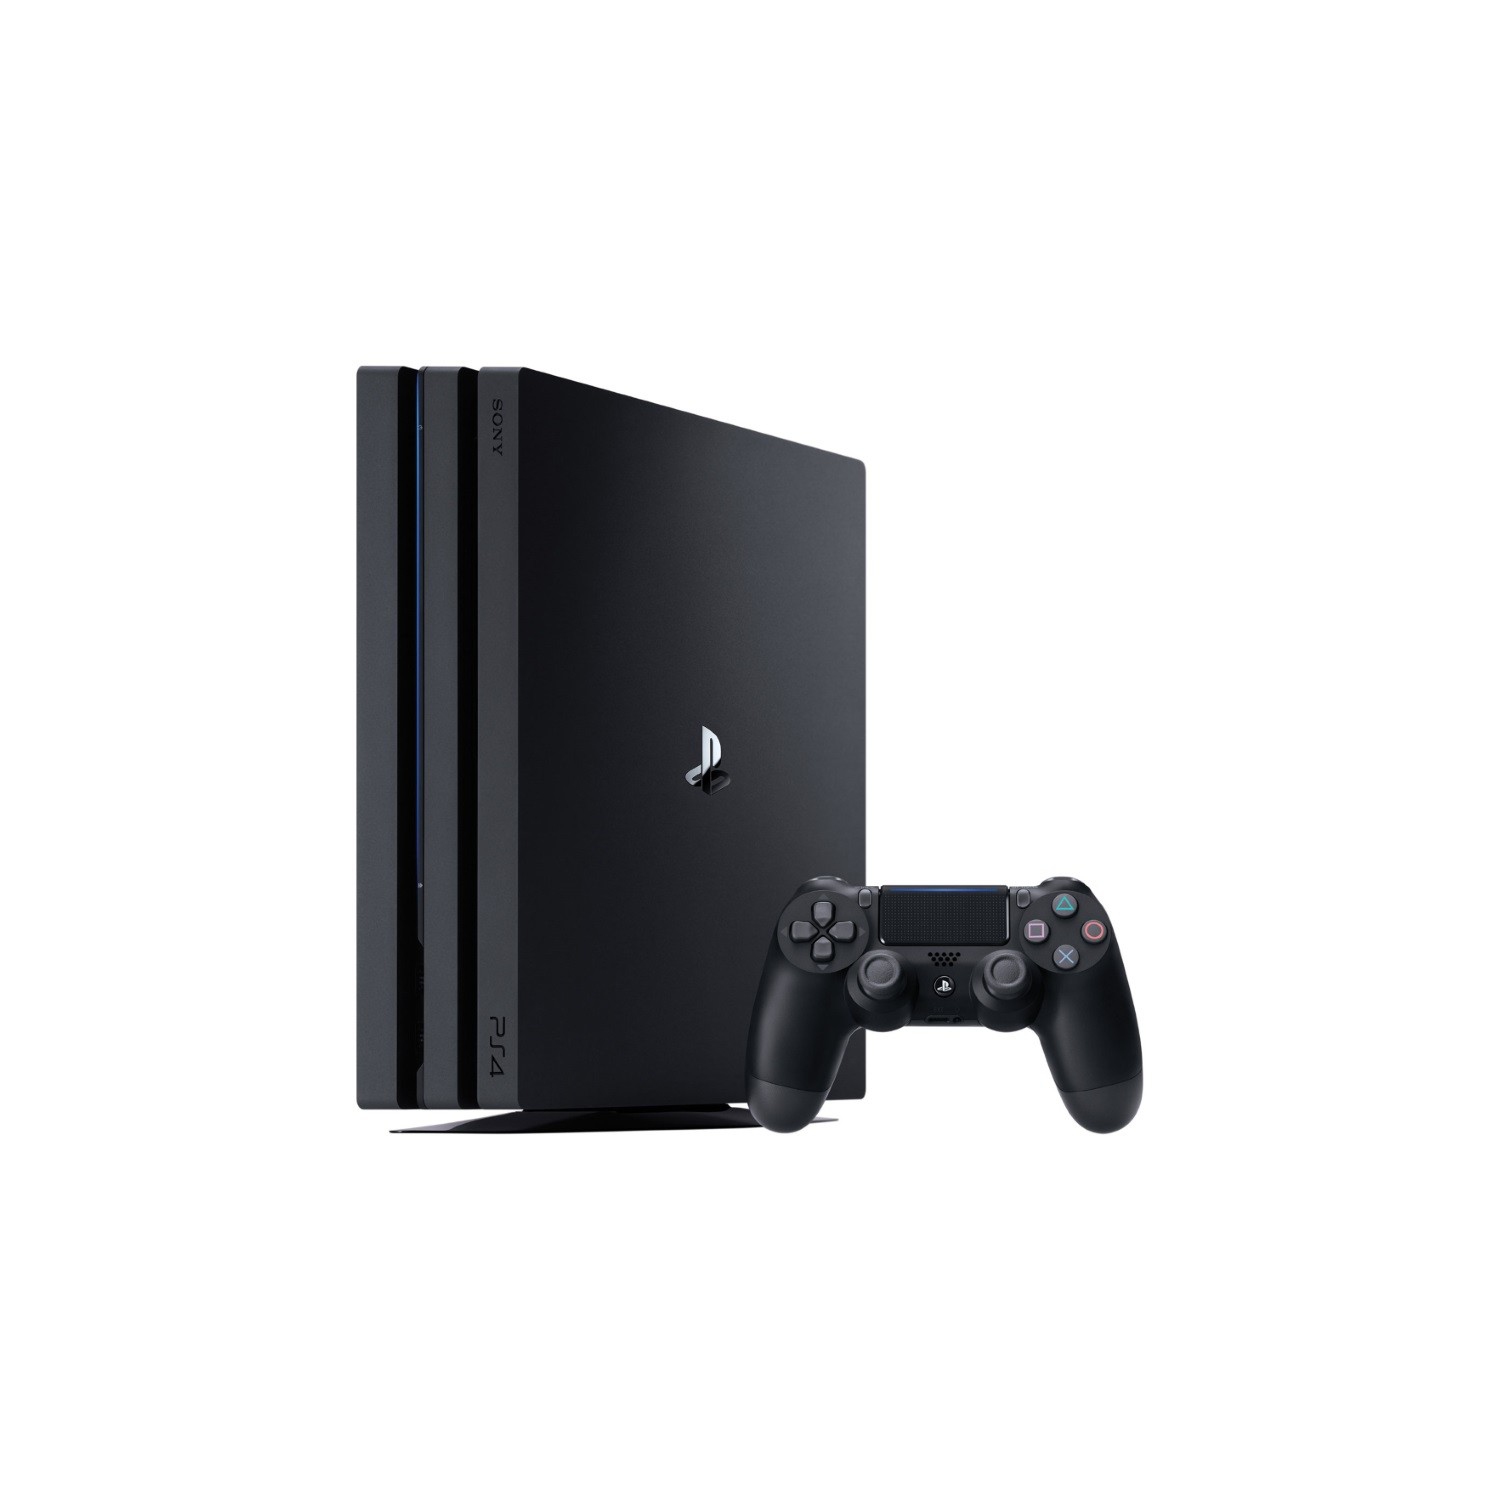 Refurbished (Excellent) - Sony PlayStation 4 Pro 1TB - CUH7015B - Certified Refurbished